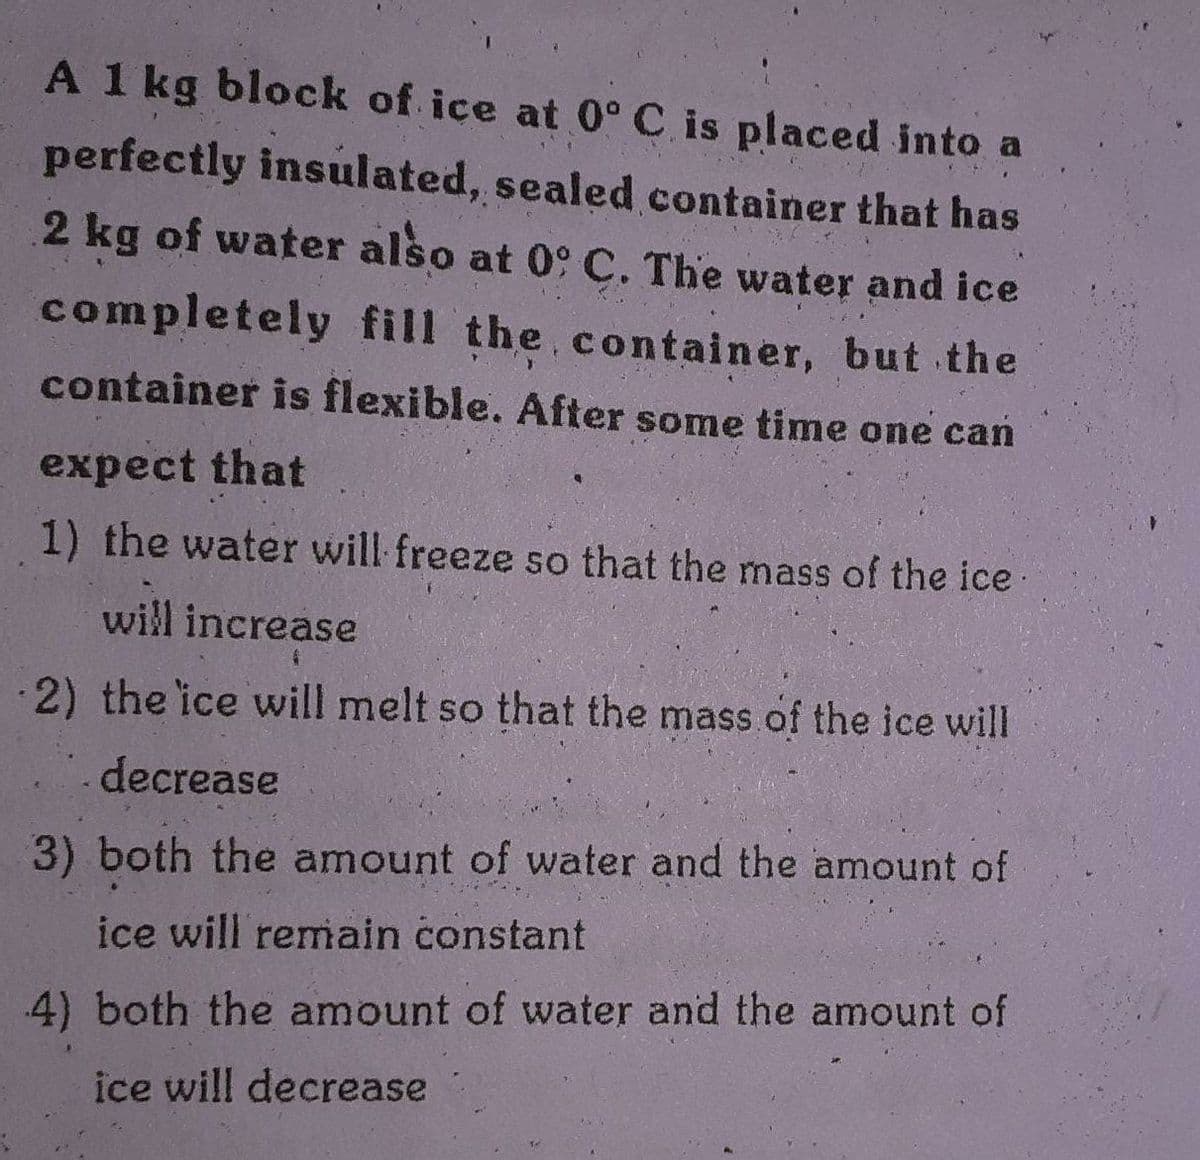 A 1 kg block of ice at 0° C is placed into a
perfectly insulated, sealed container that has
2 kg of water also at 09 C. The water and ice
completely fill the.container, but the
container is flexible. After some time one can
expect that
1) the water will freeze so that the mass of the ice
will increase
2) the ice wwill melt so that the mass of the ice will
decrease
3) both the amount of water and the amount of
ice will remain constant
4) both the amount of water and the amount of
ice will decrease
